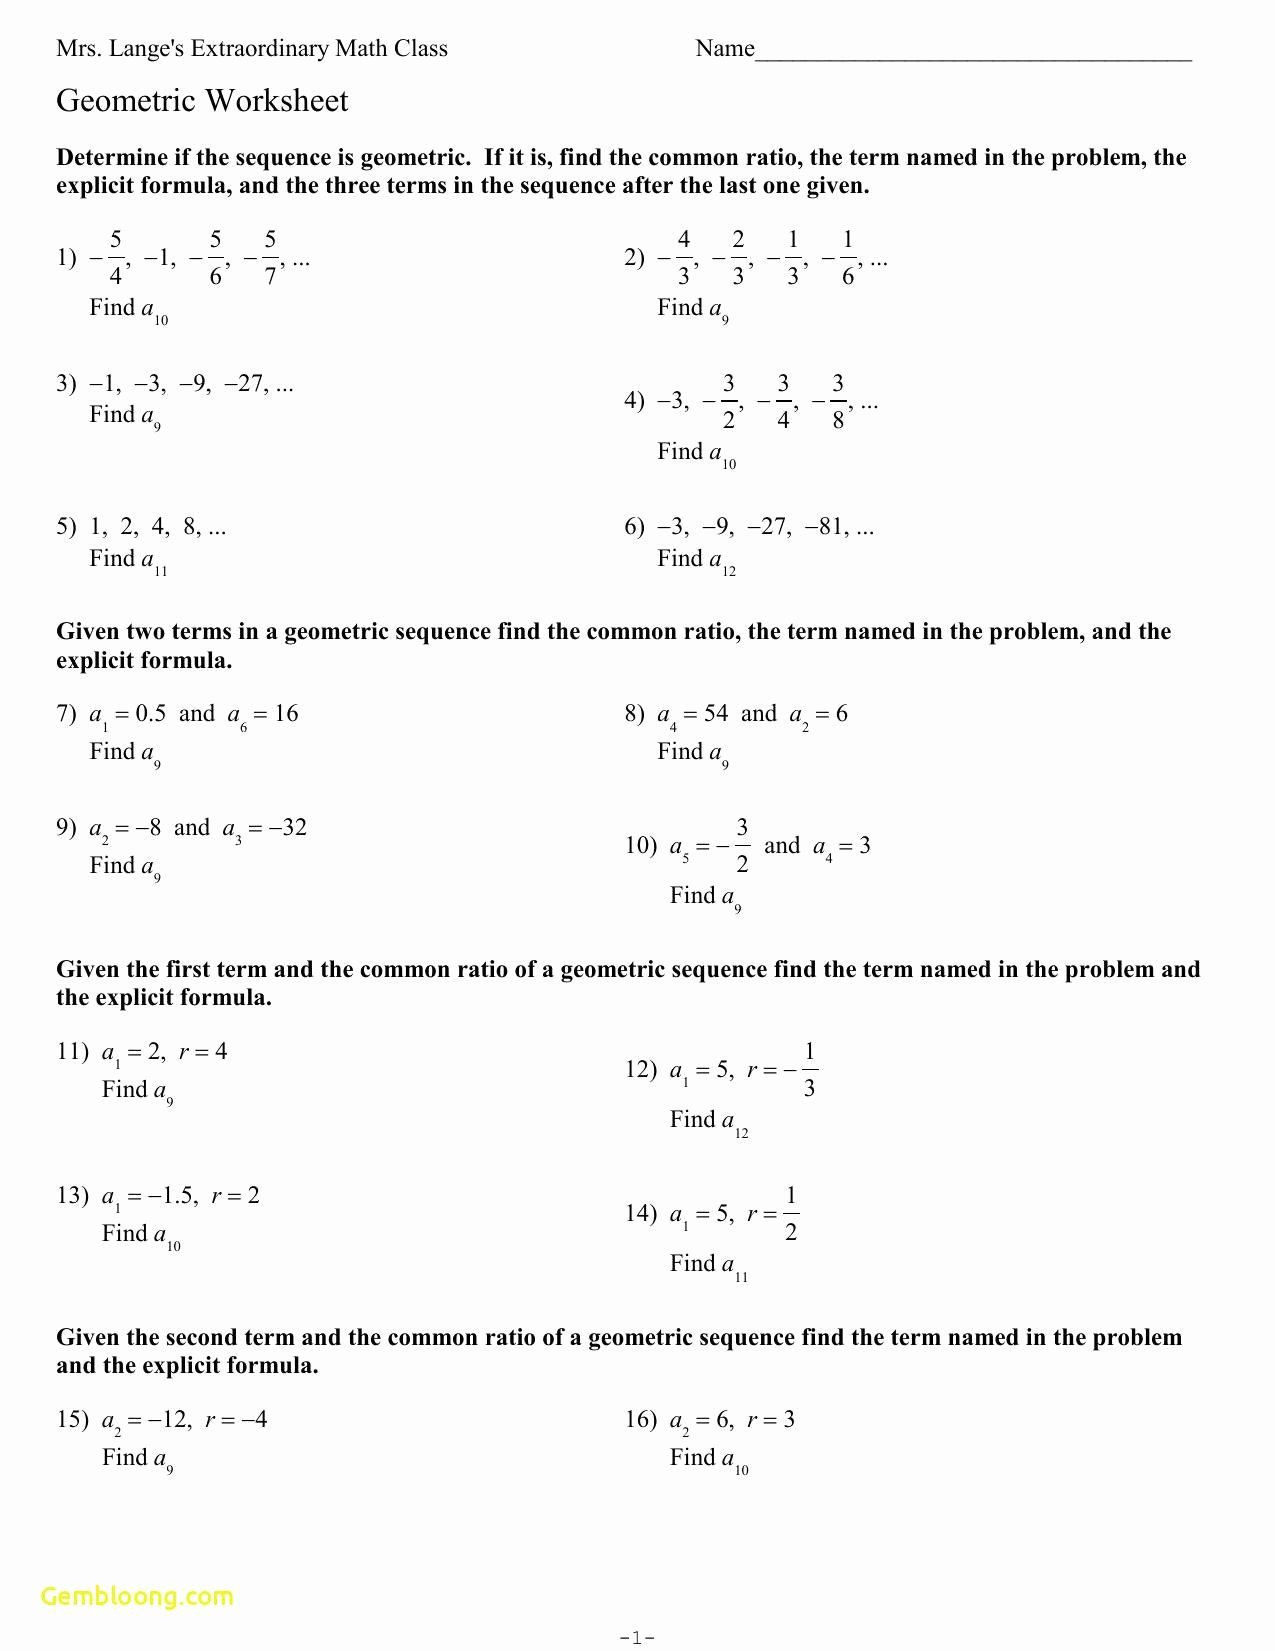 Arithmetic Sequence Worksheet with Answers 50 Arithmetic Sequence Worksheet Answers In 2020 with